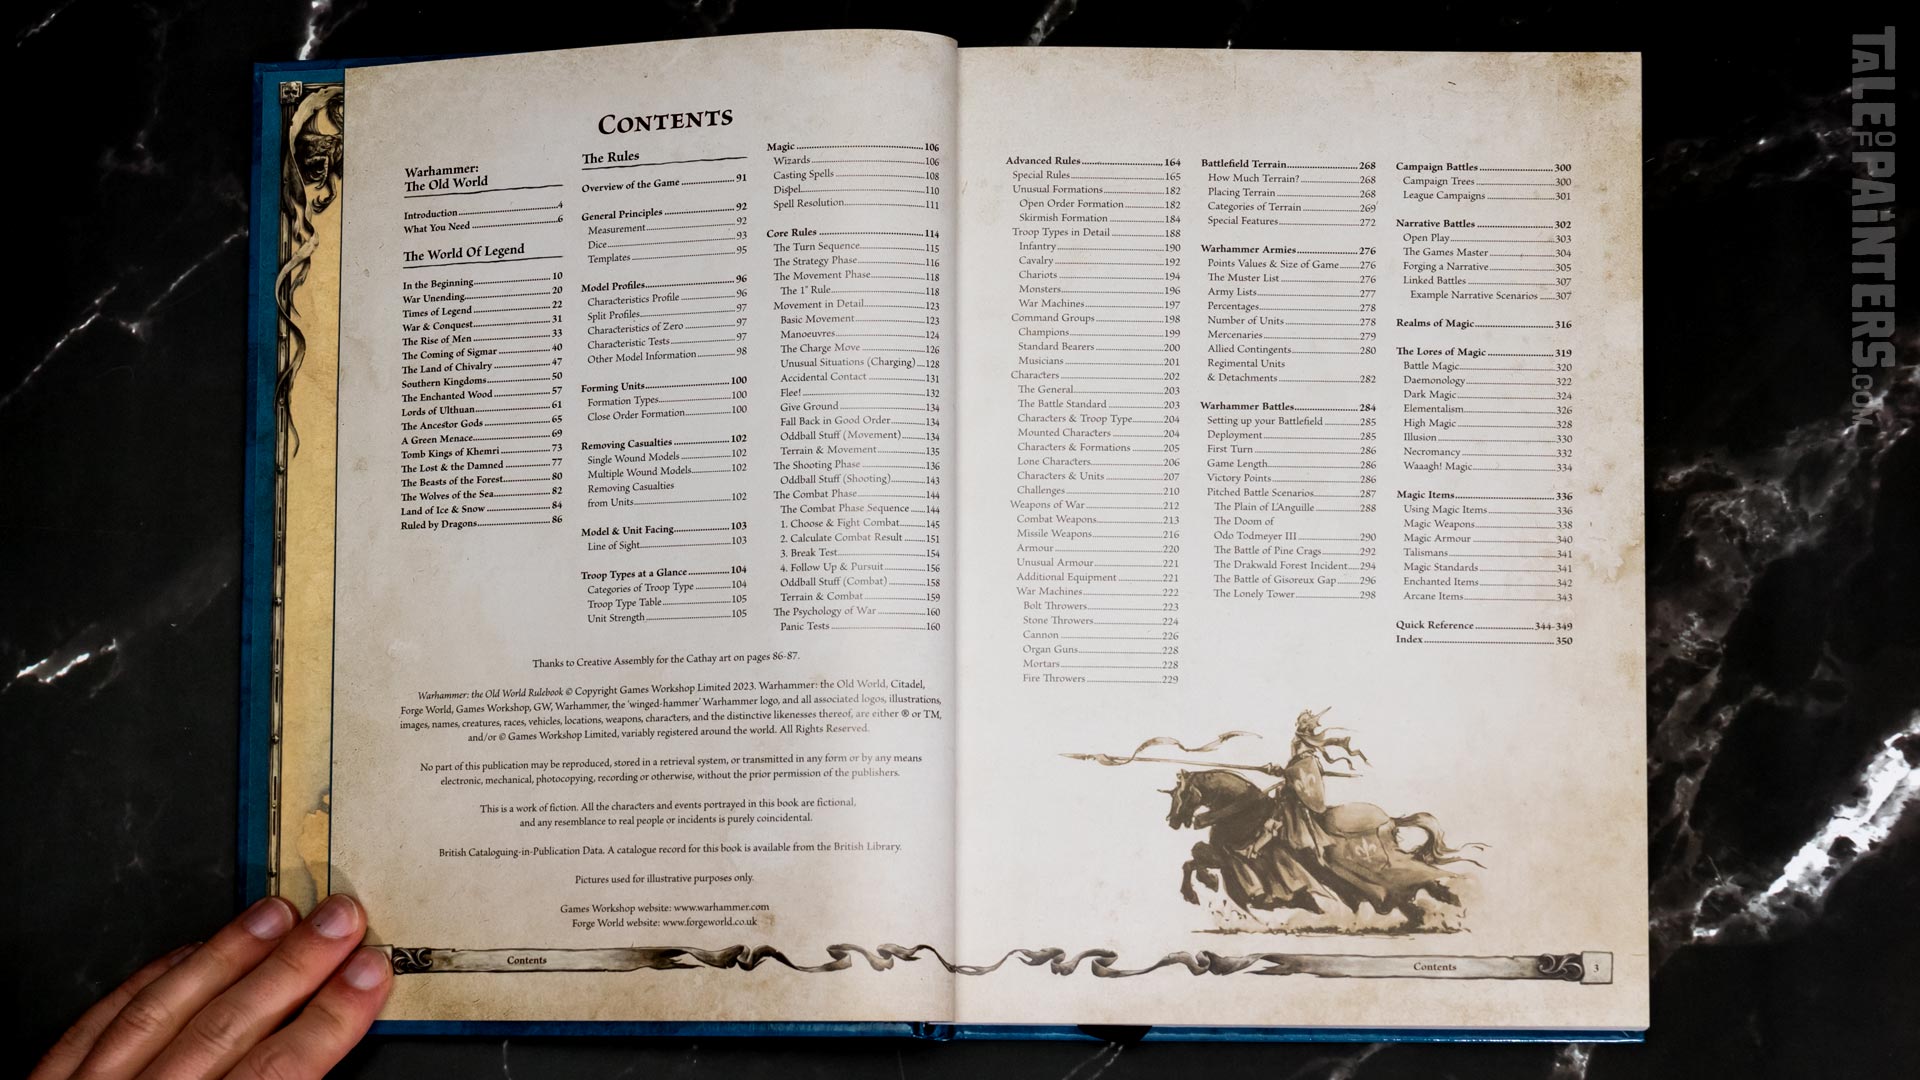 Warhammer: The Old World rulebook contents page